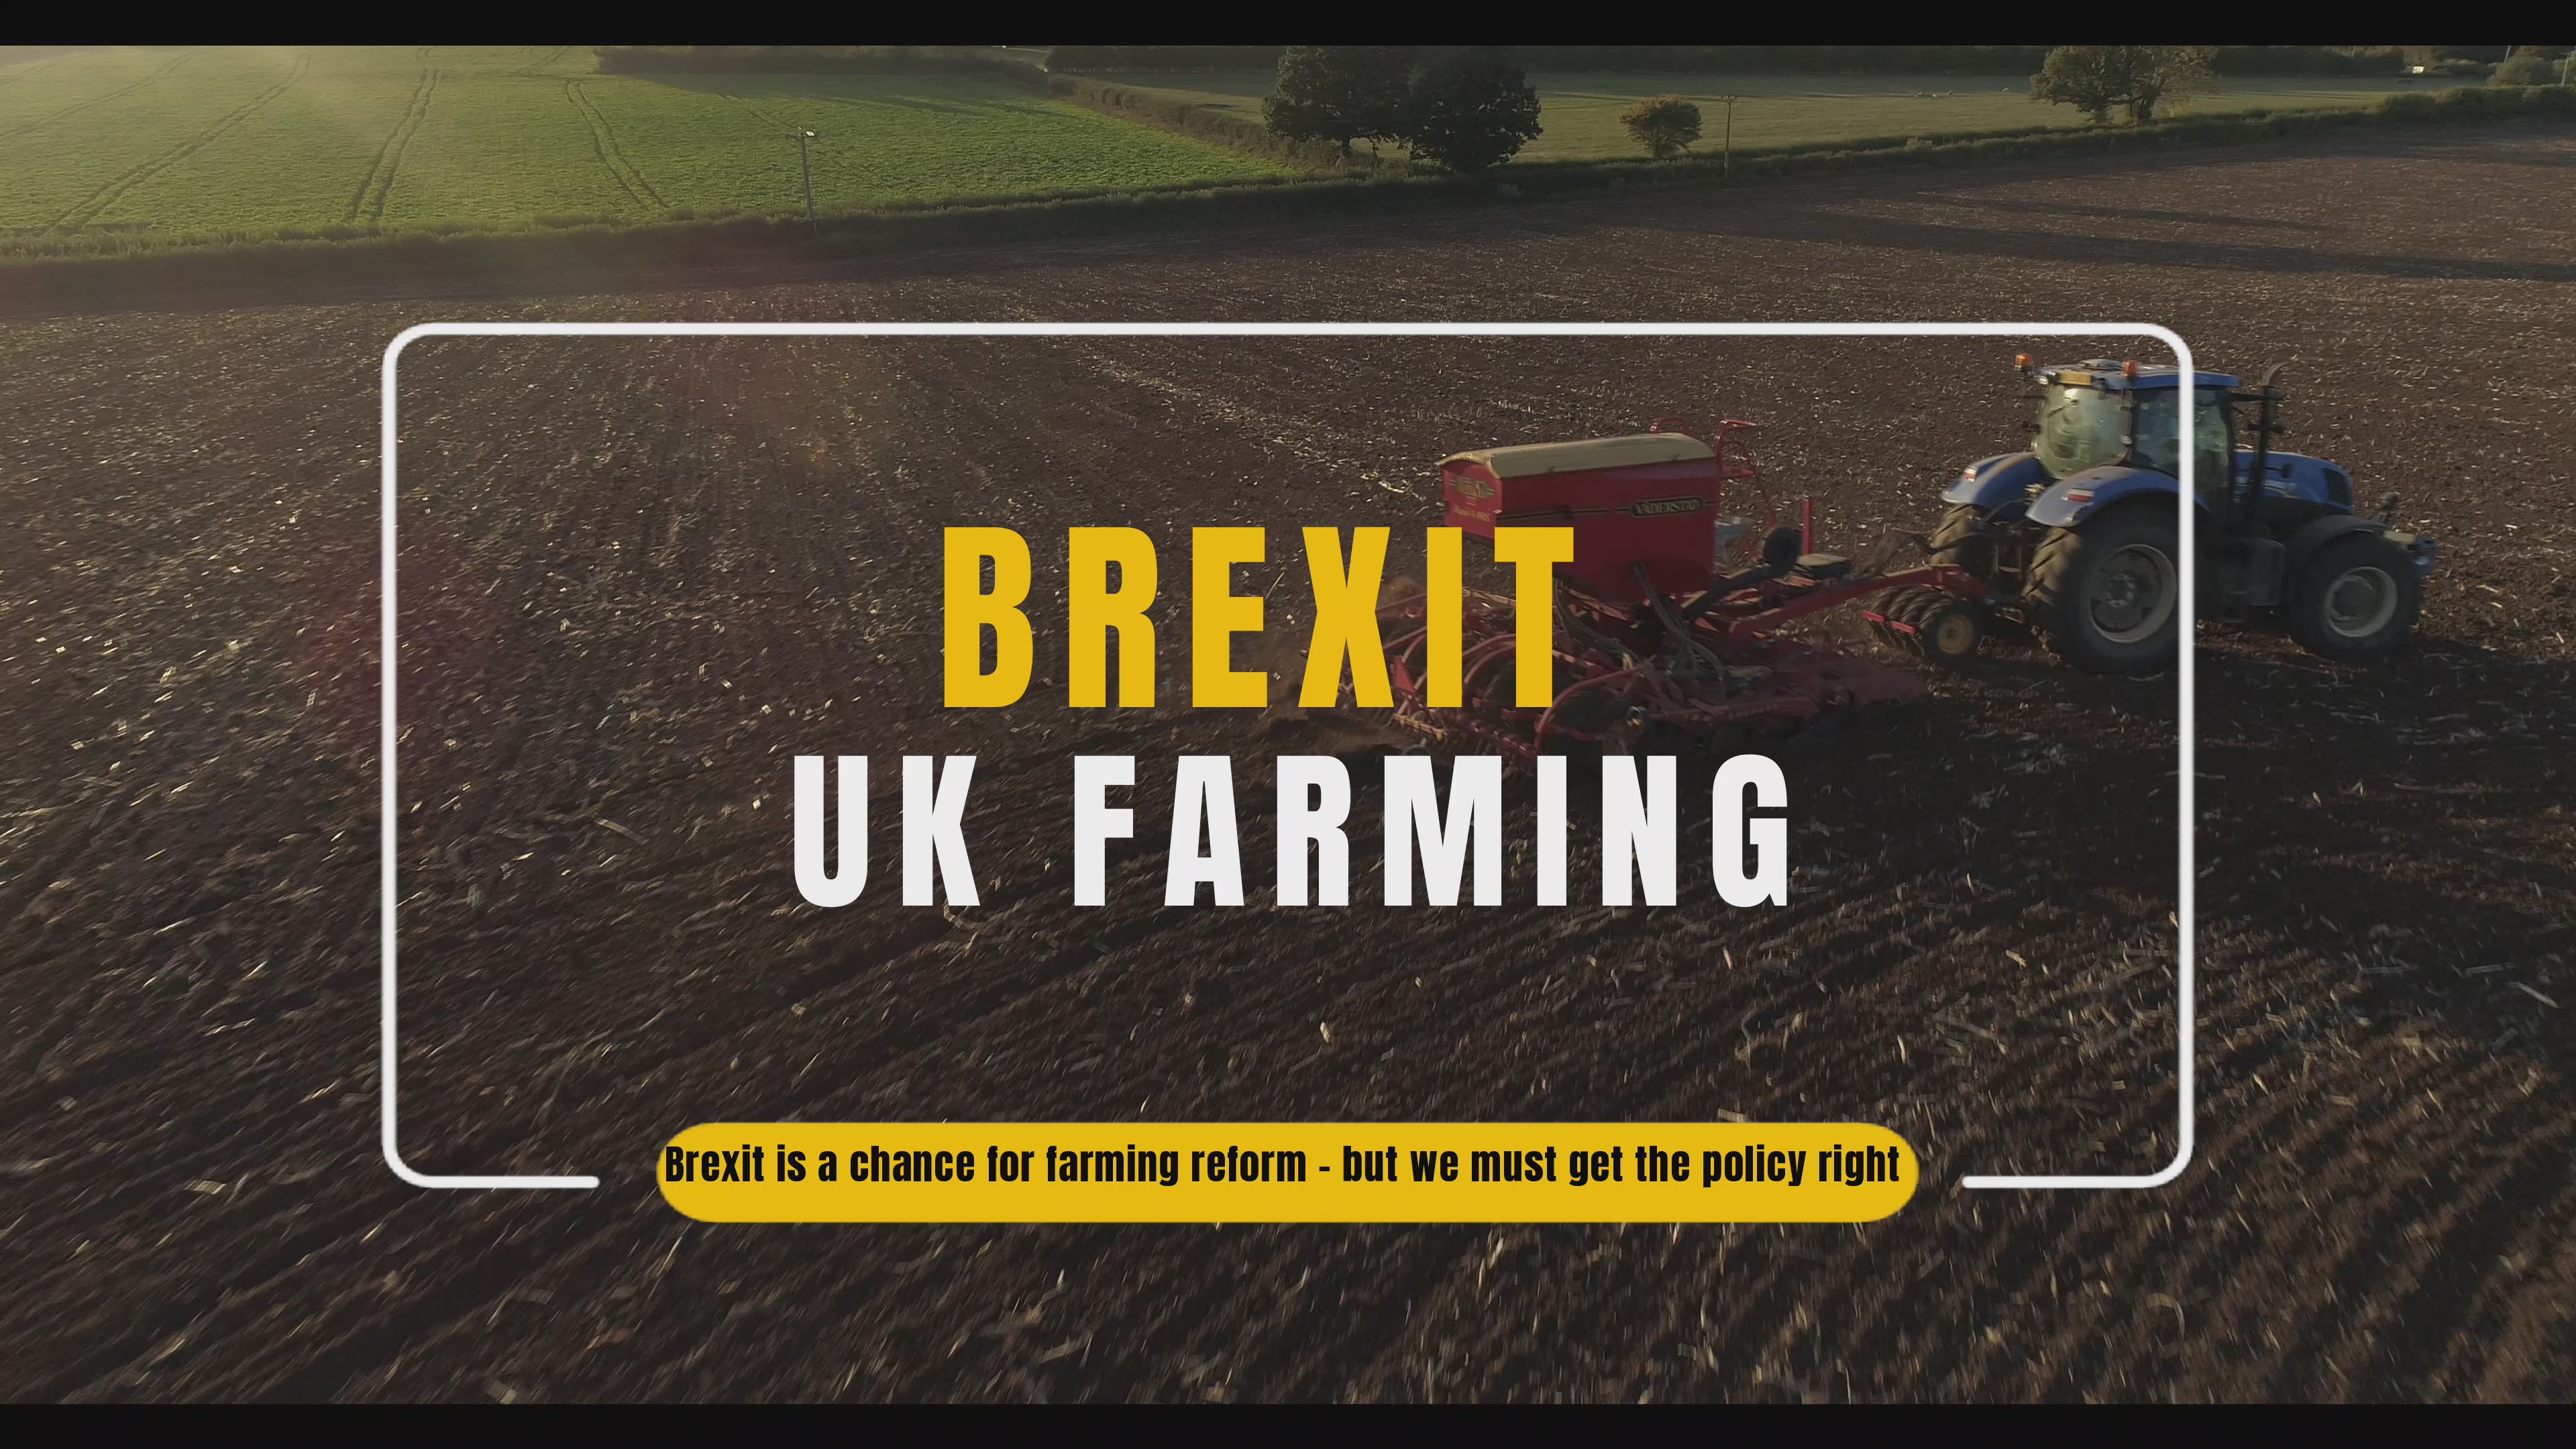 Brexit uk farming reform no deal EU referendum news and video borris johnson British Agricultural Policy after brexit